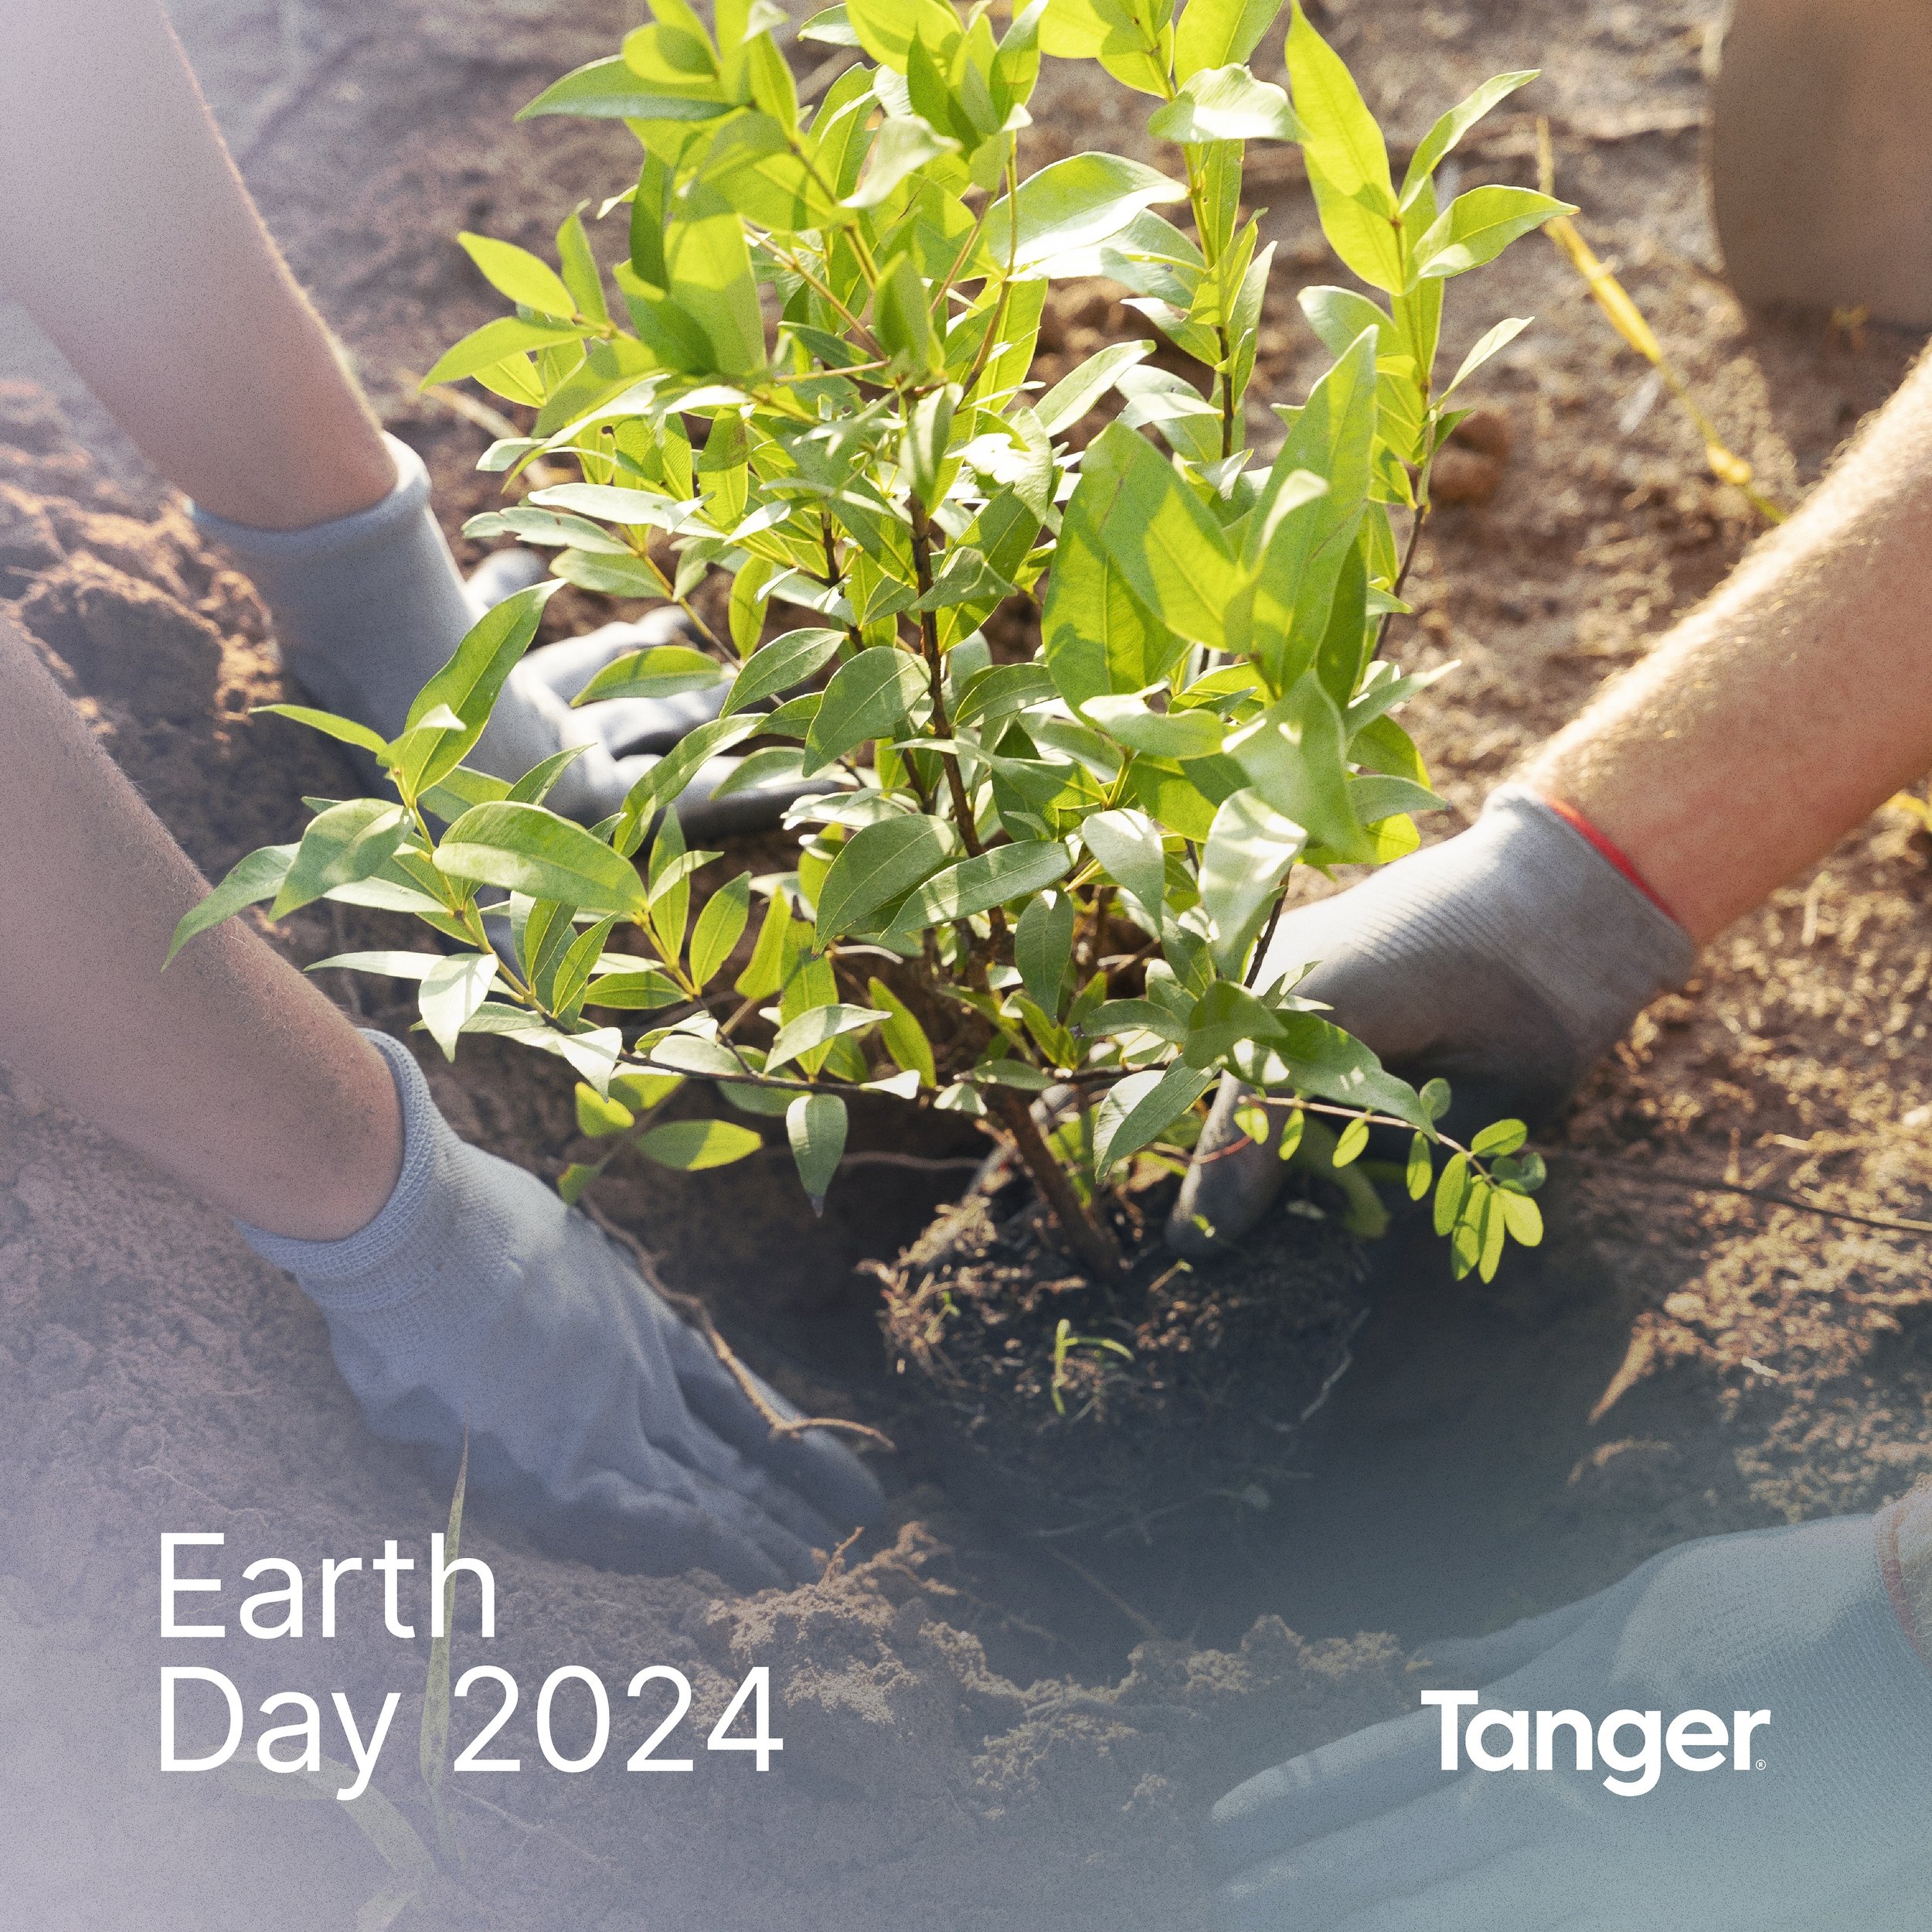 This #EarthDay, we&rsquo;re shining a spotlight on&nbsp;@tangeroutlets&nbsp;and their commitment to sustainability. 🌎 Teams at Tanger&nbsp;will be planting trees and partnering with local charities to help keep our planet green, and KWT is proud to 